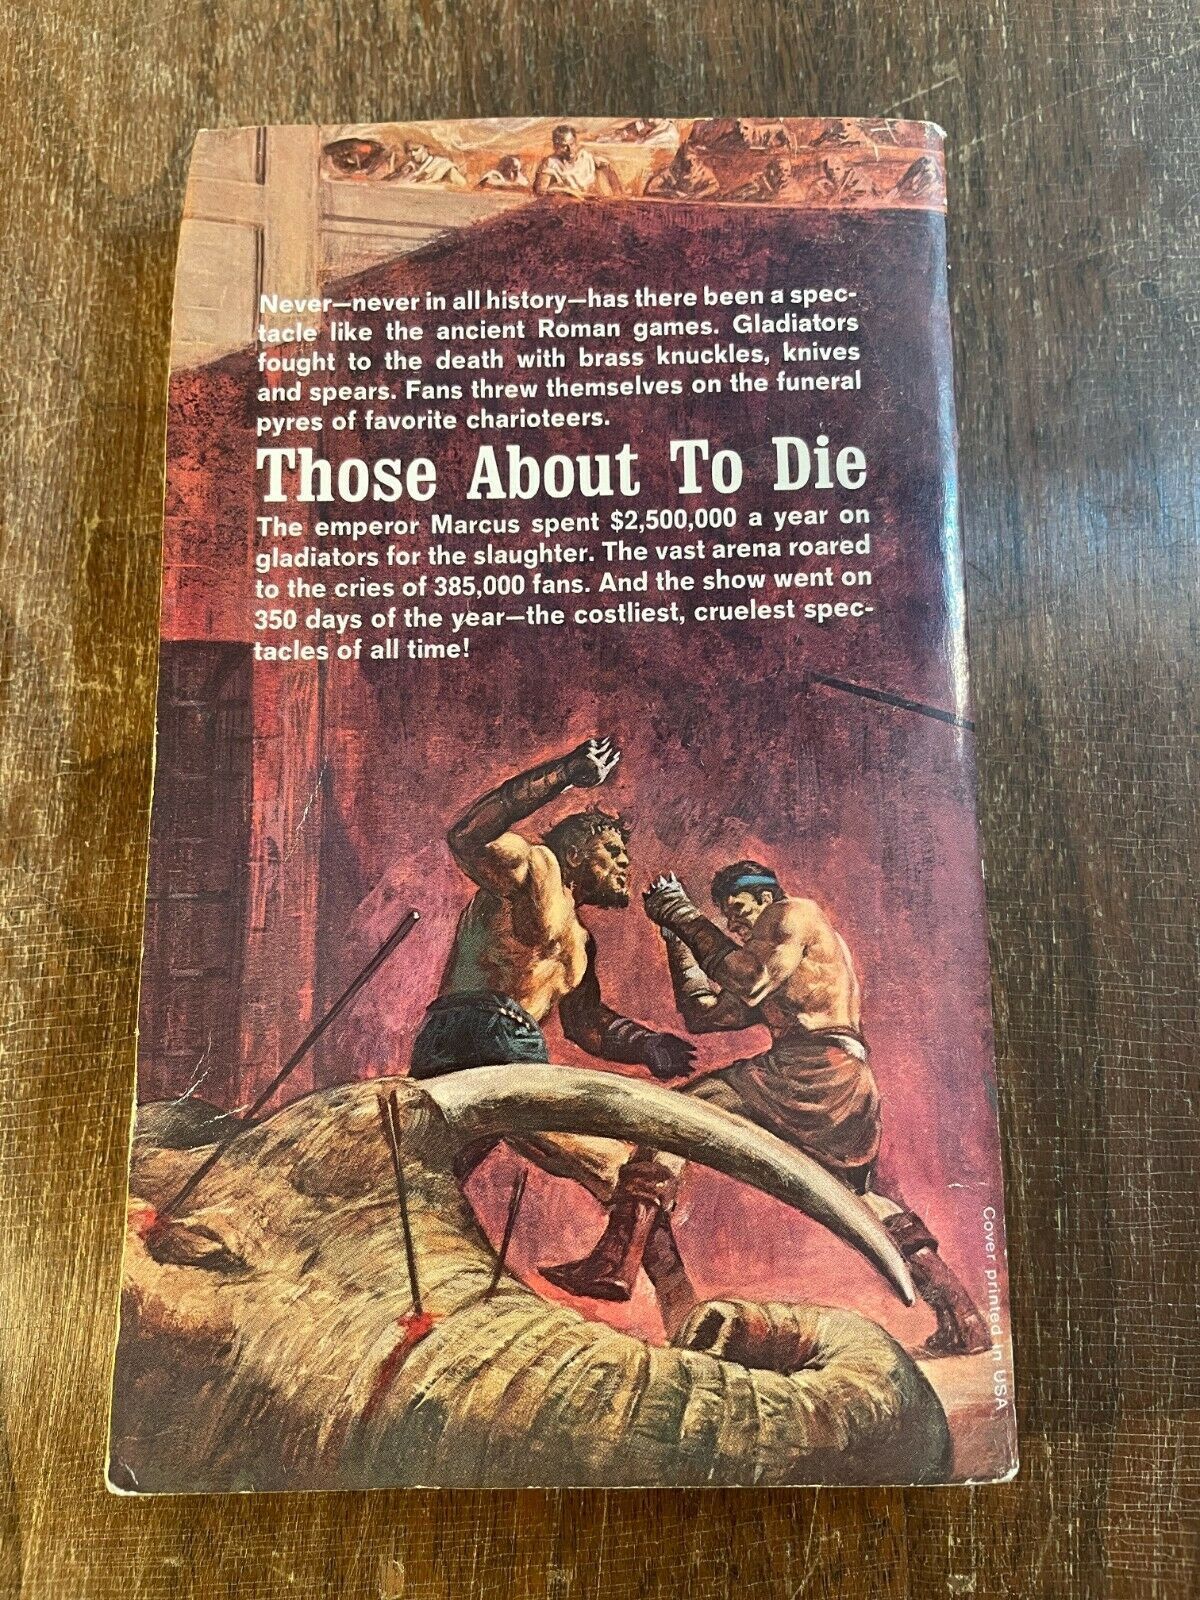 Those About To Die by Daniel P. Mannix (PB) 5th Printing 1969 (Q1)